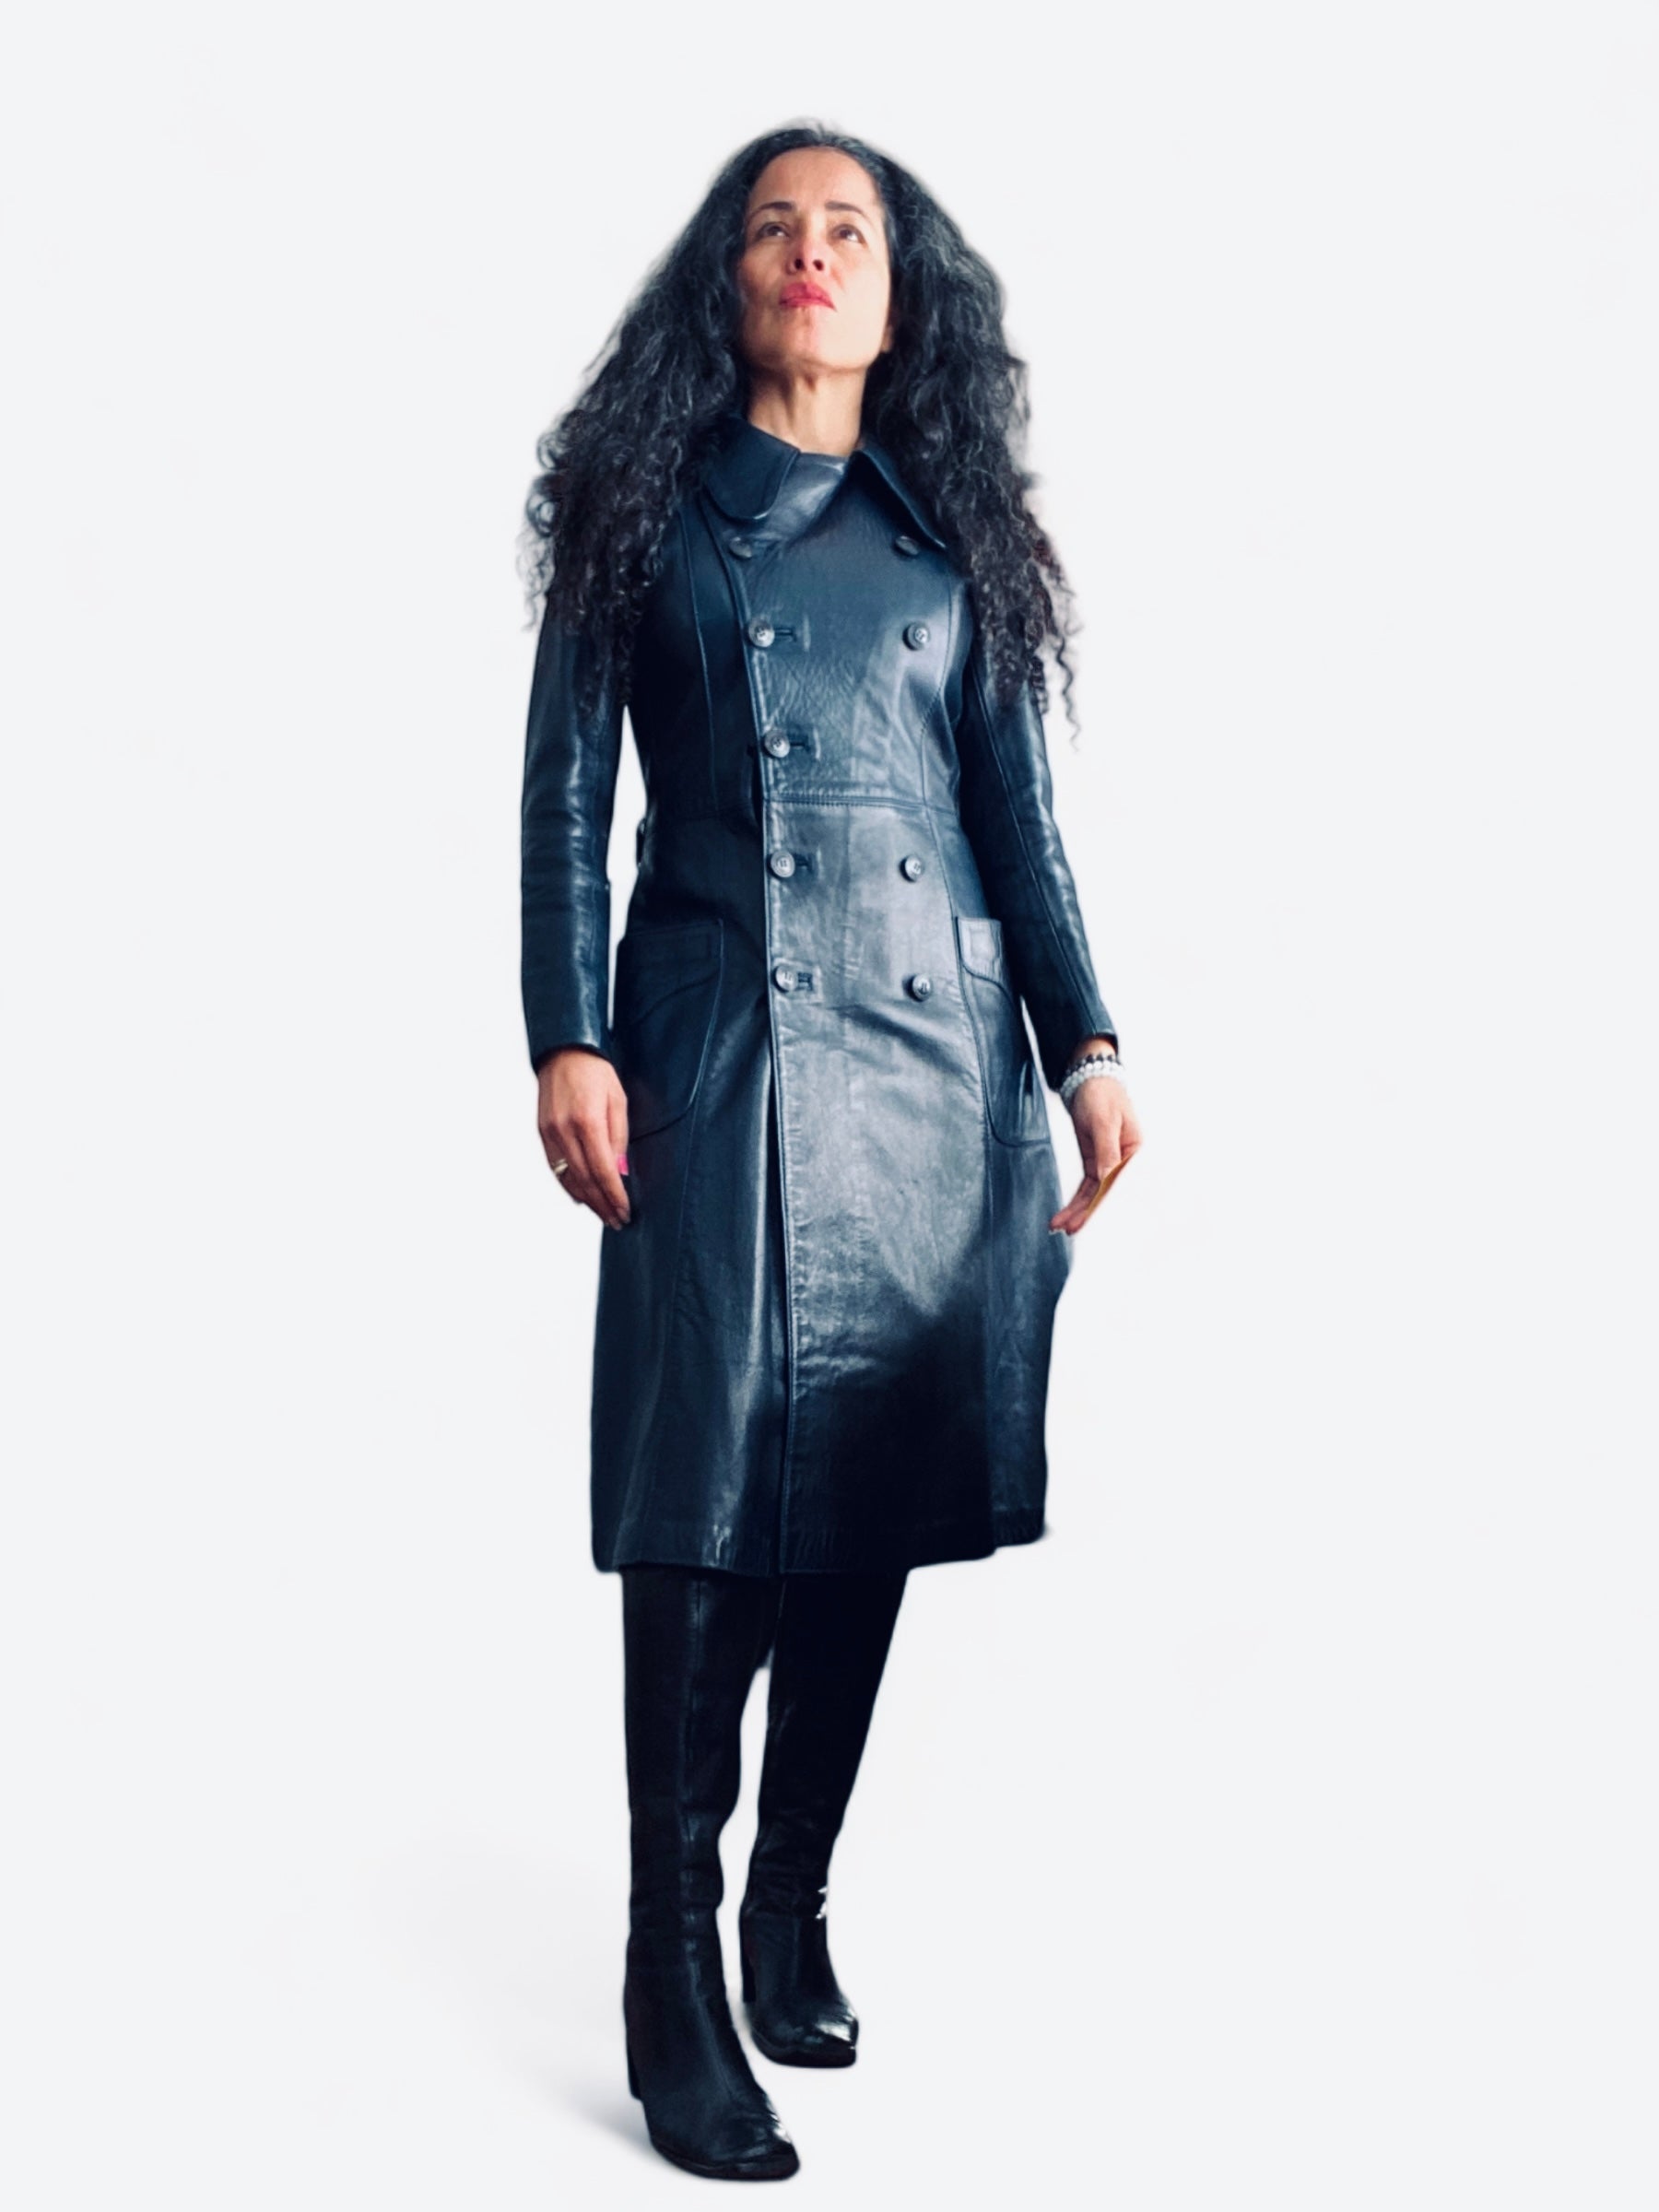 Navy Blue Leather Trench *As Is*